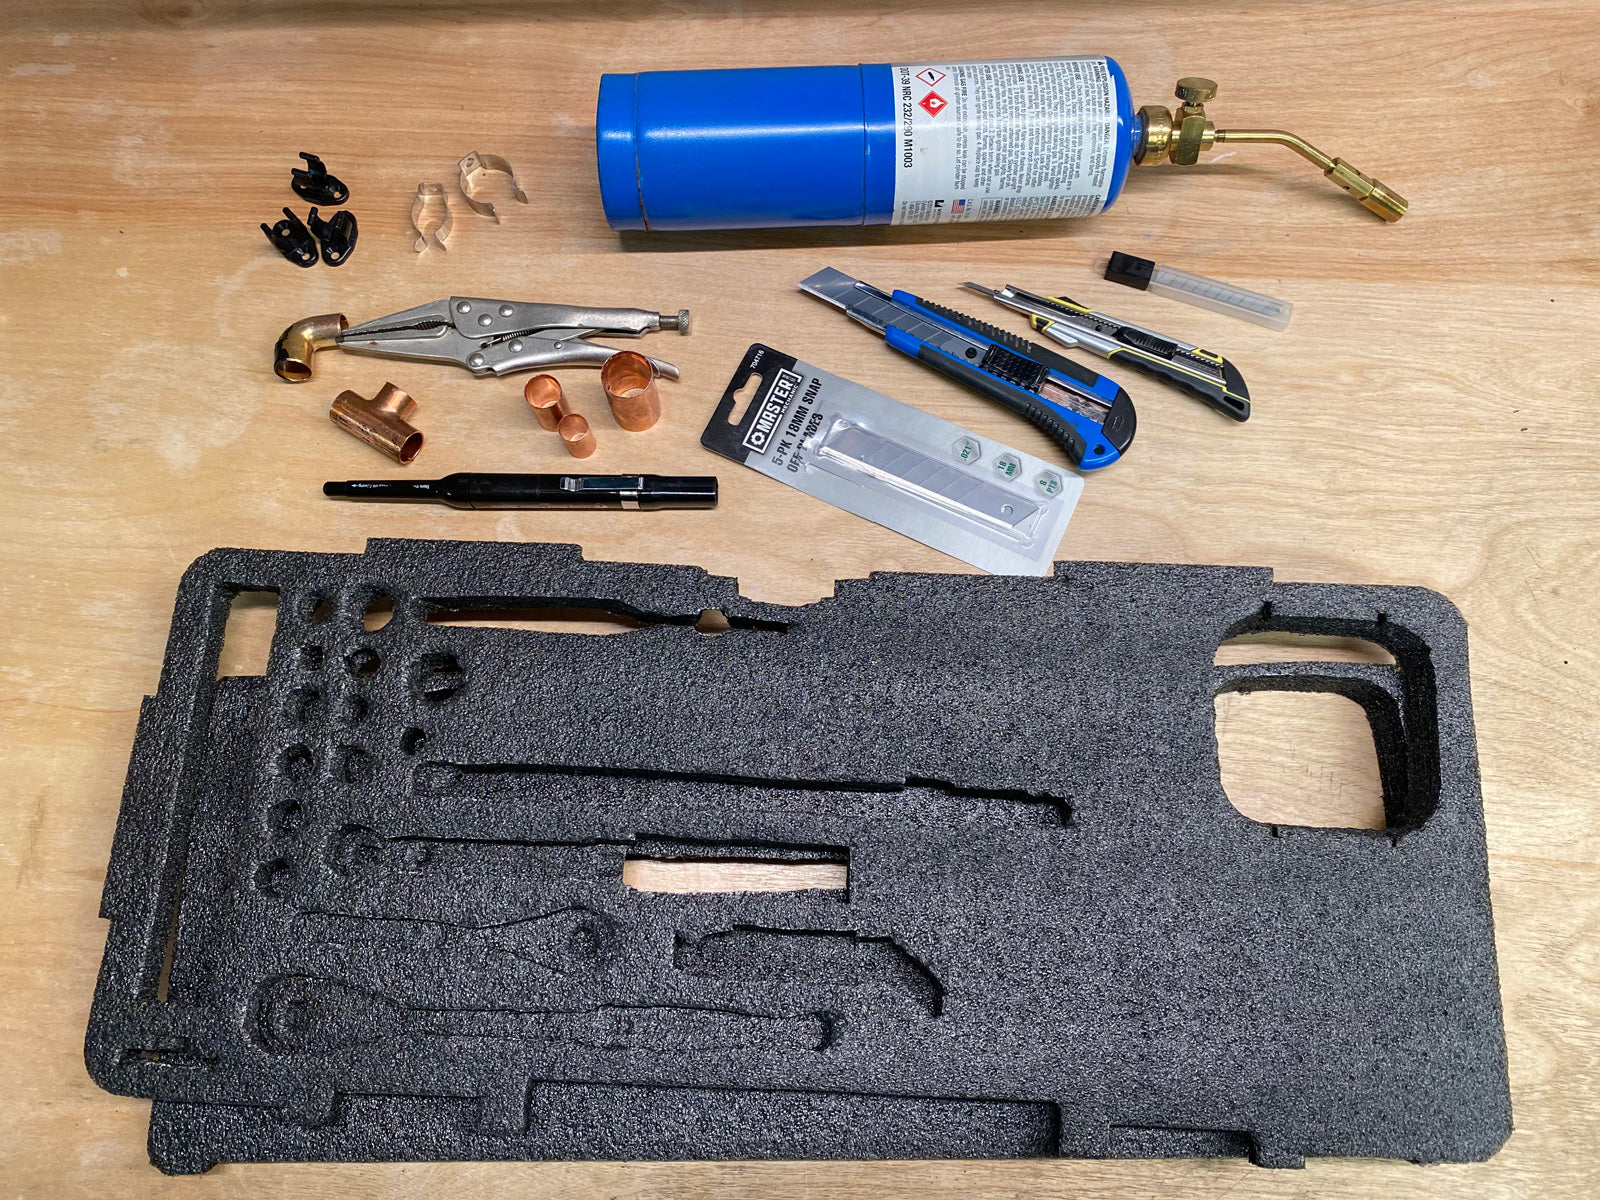 Supplies needed for organizing a mountain bike tool box with Kaizen foam